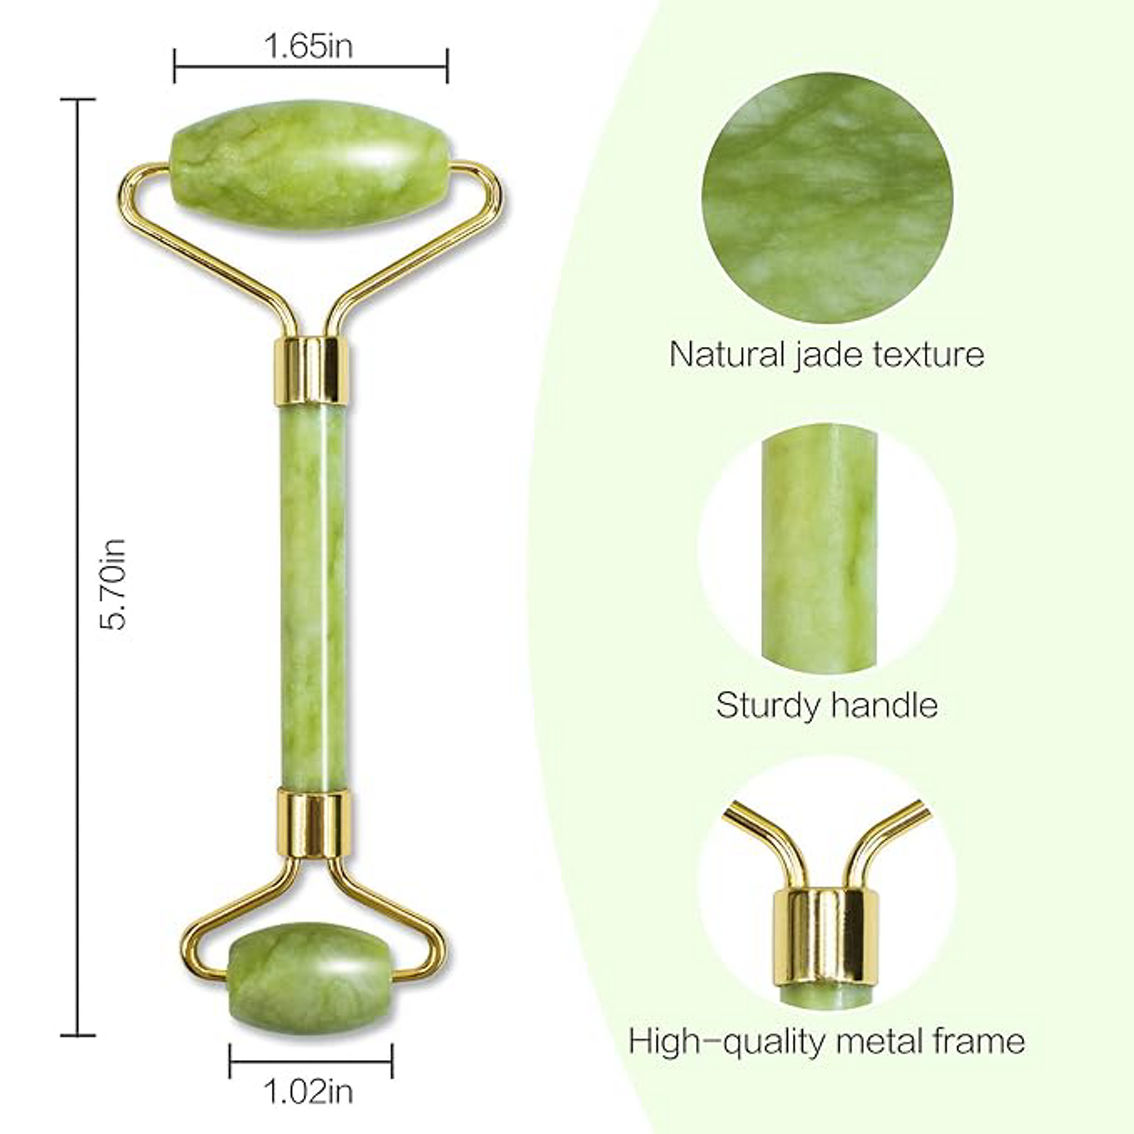 Lovery Unisex 2 Pack Jade Facial Roller - Image 3 of 5